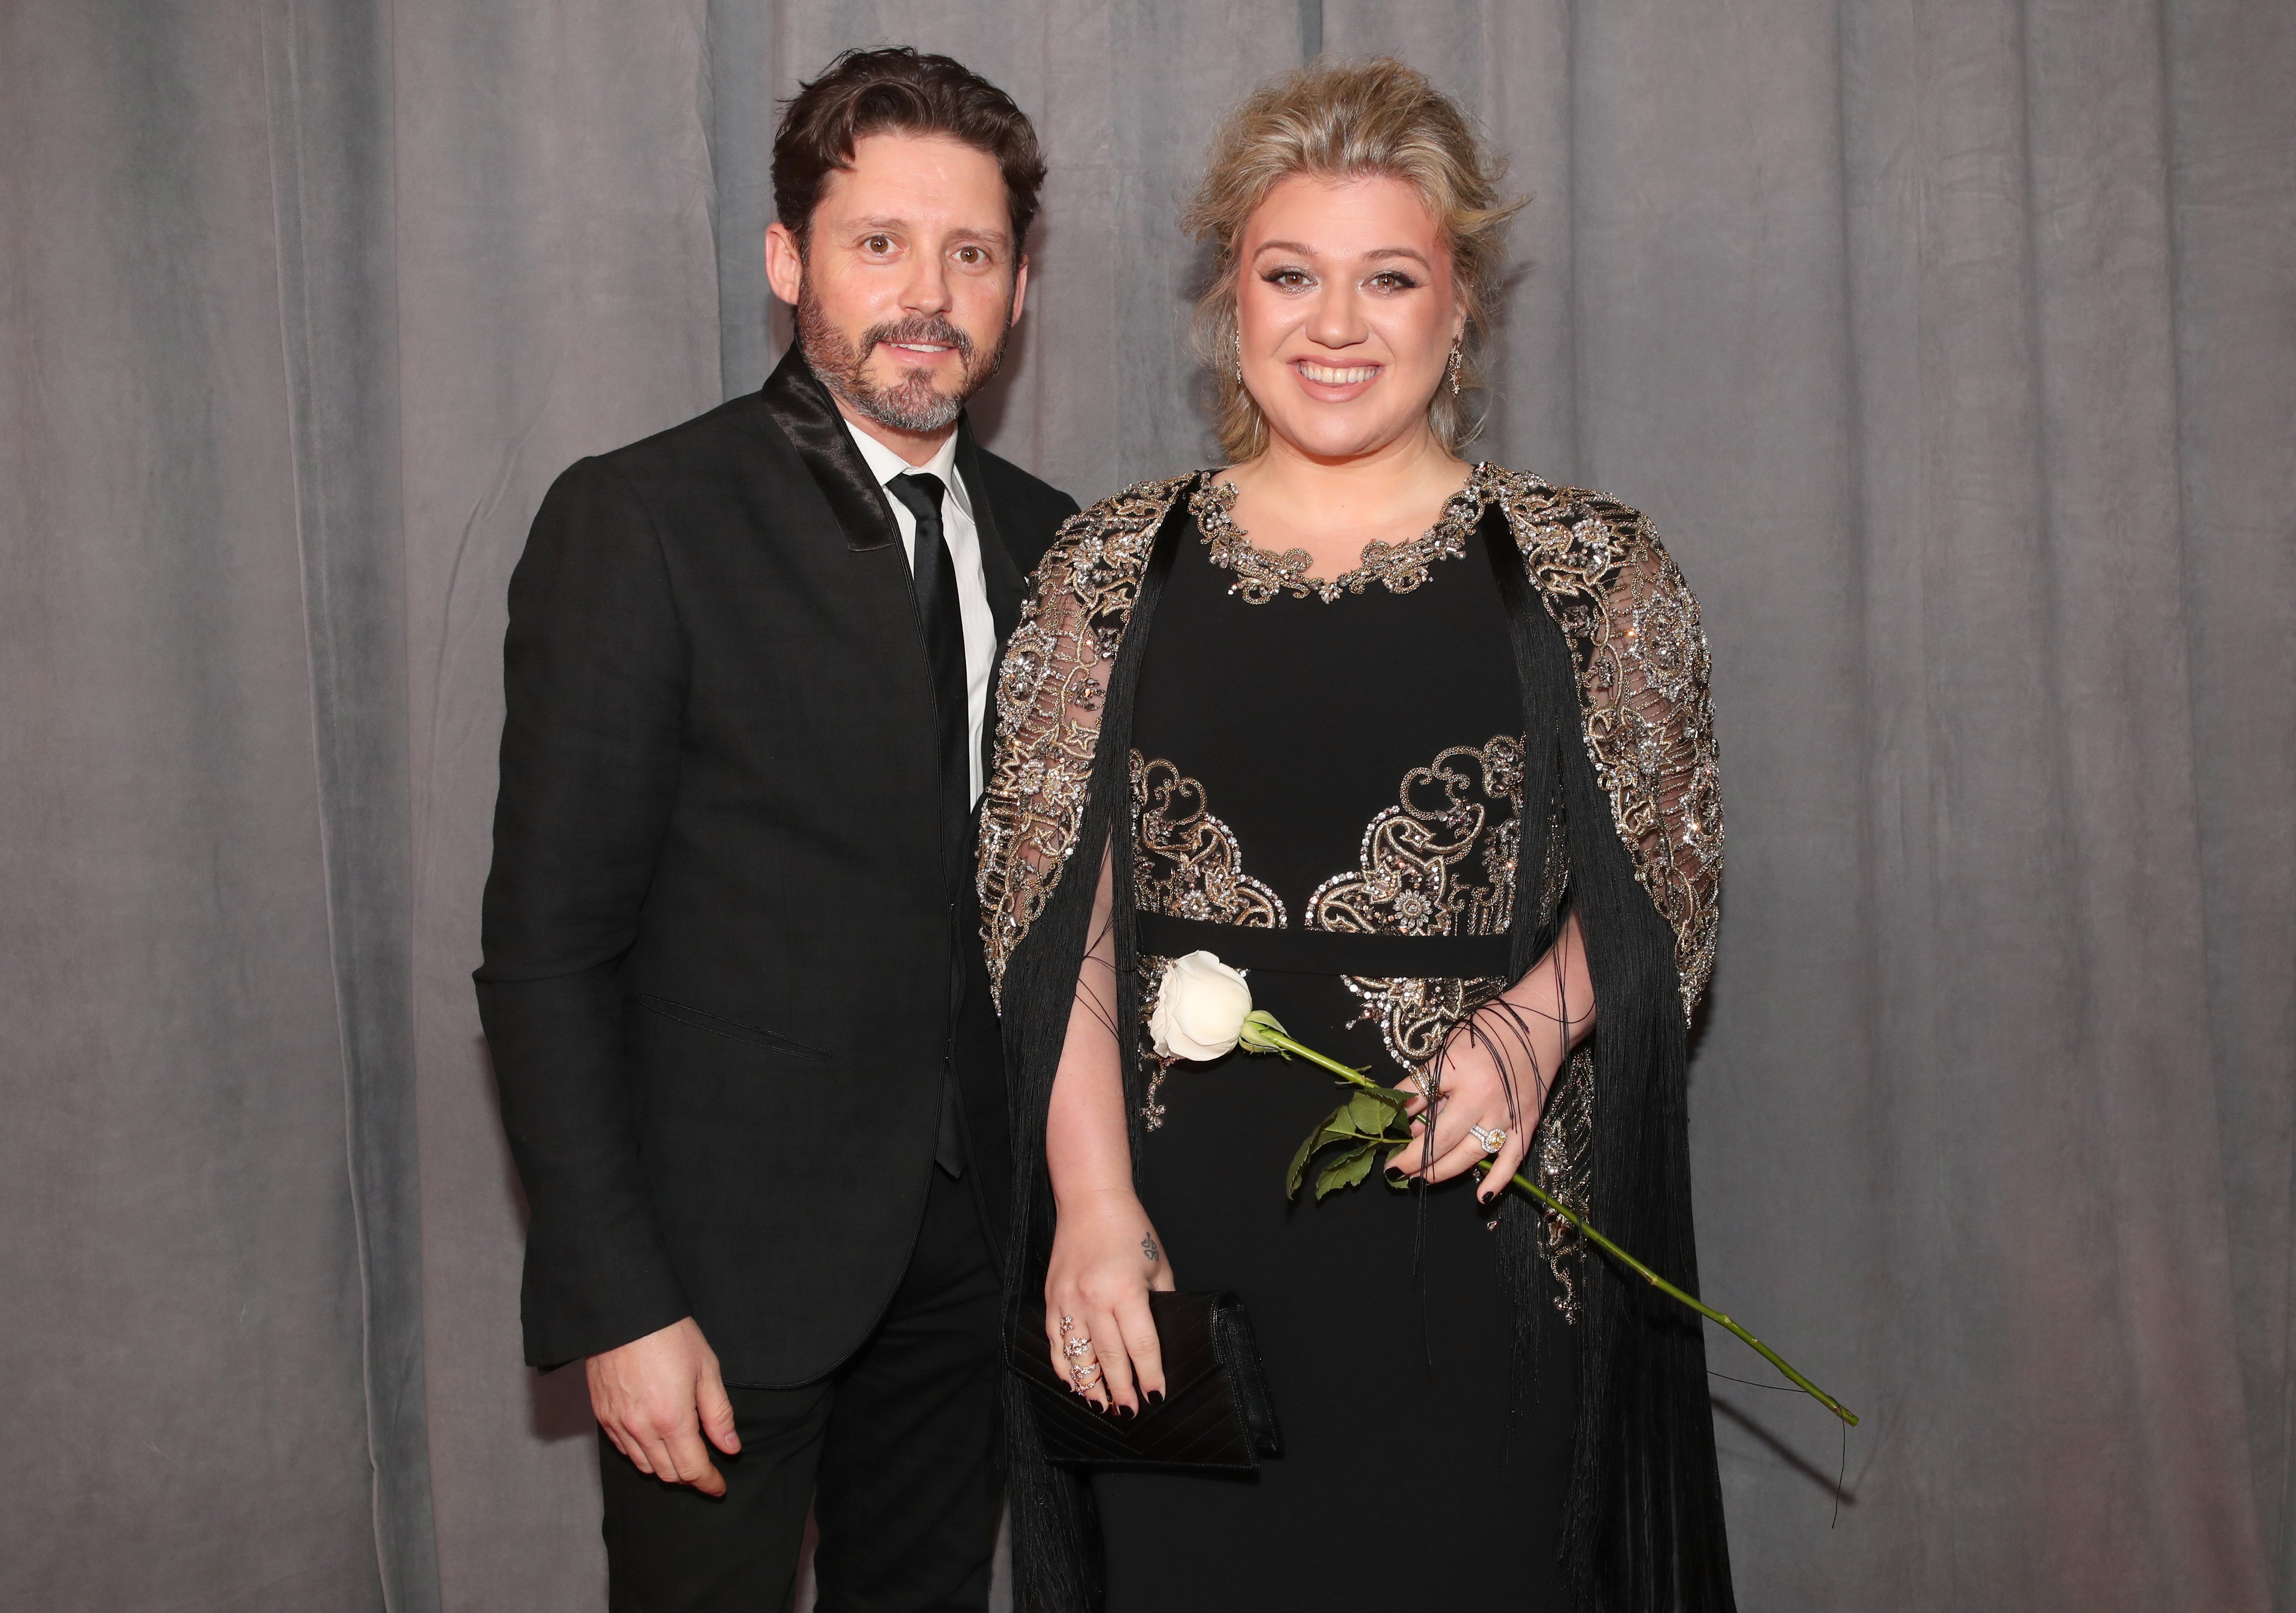 Kelly Clarkson and her husband Brandon Blackstock attend the 60th Annual Grammy Awards in New York City on January 28, 2018 | Photo: Getty Images